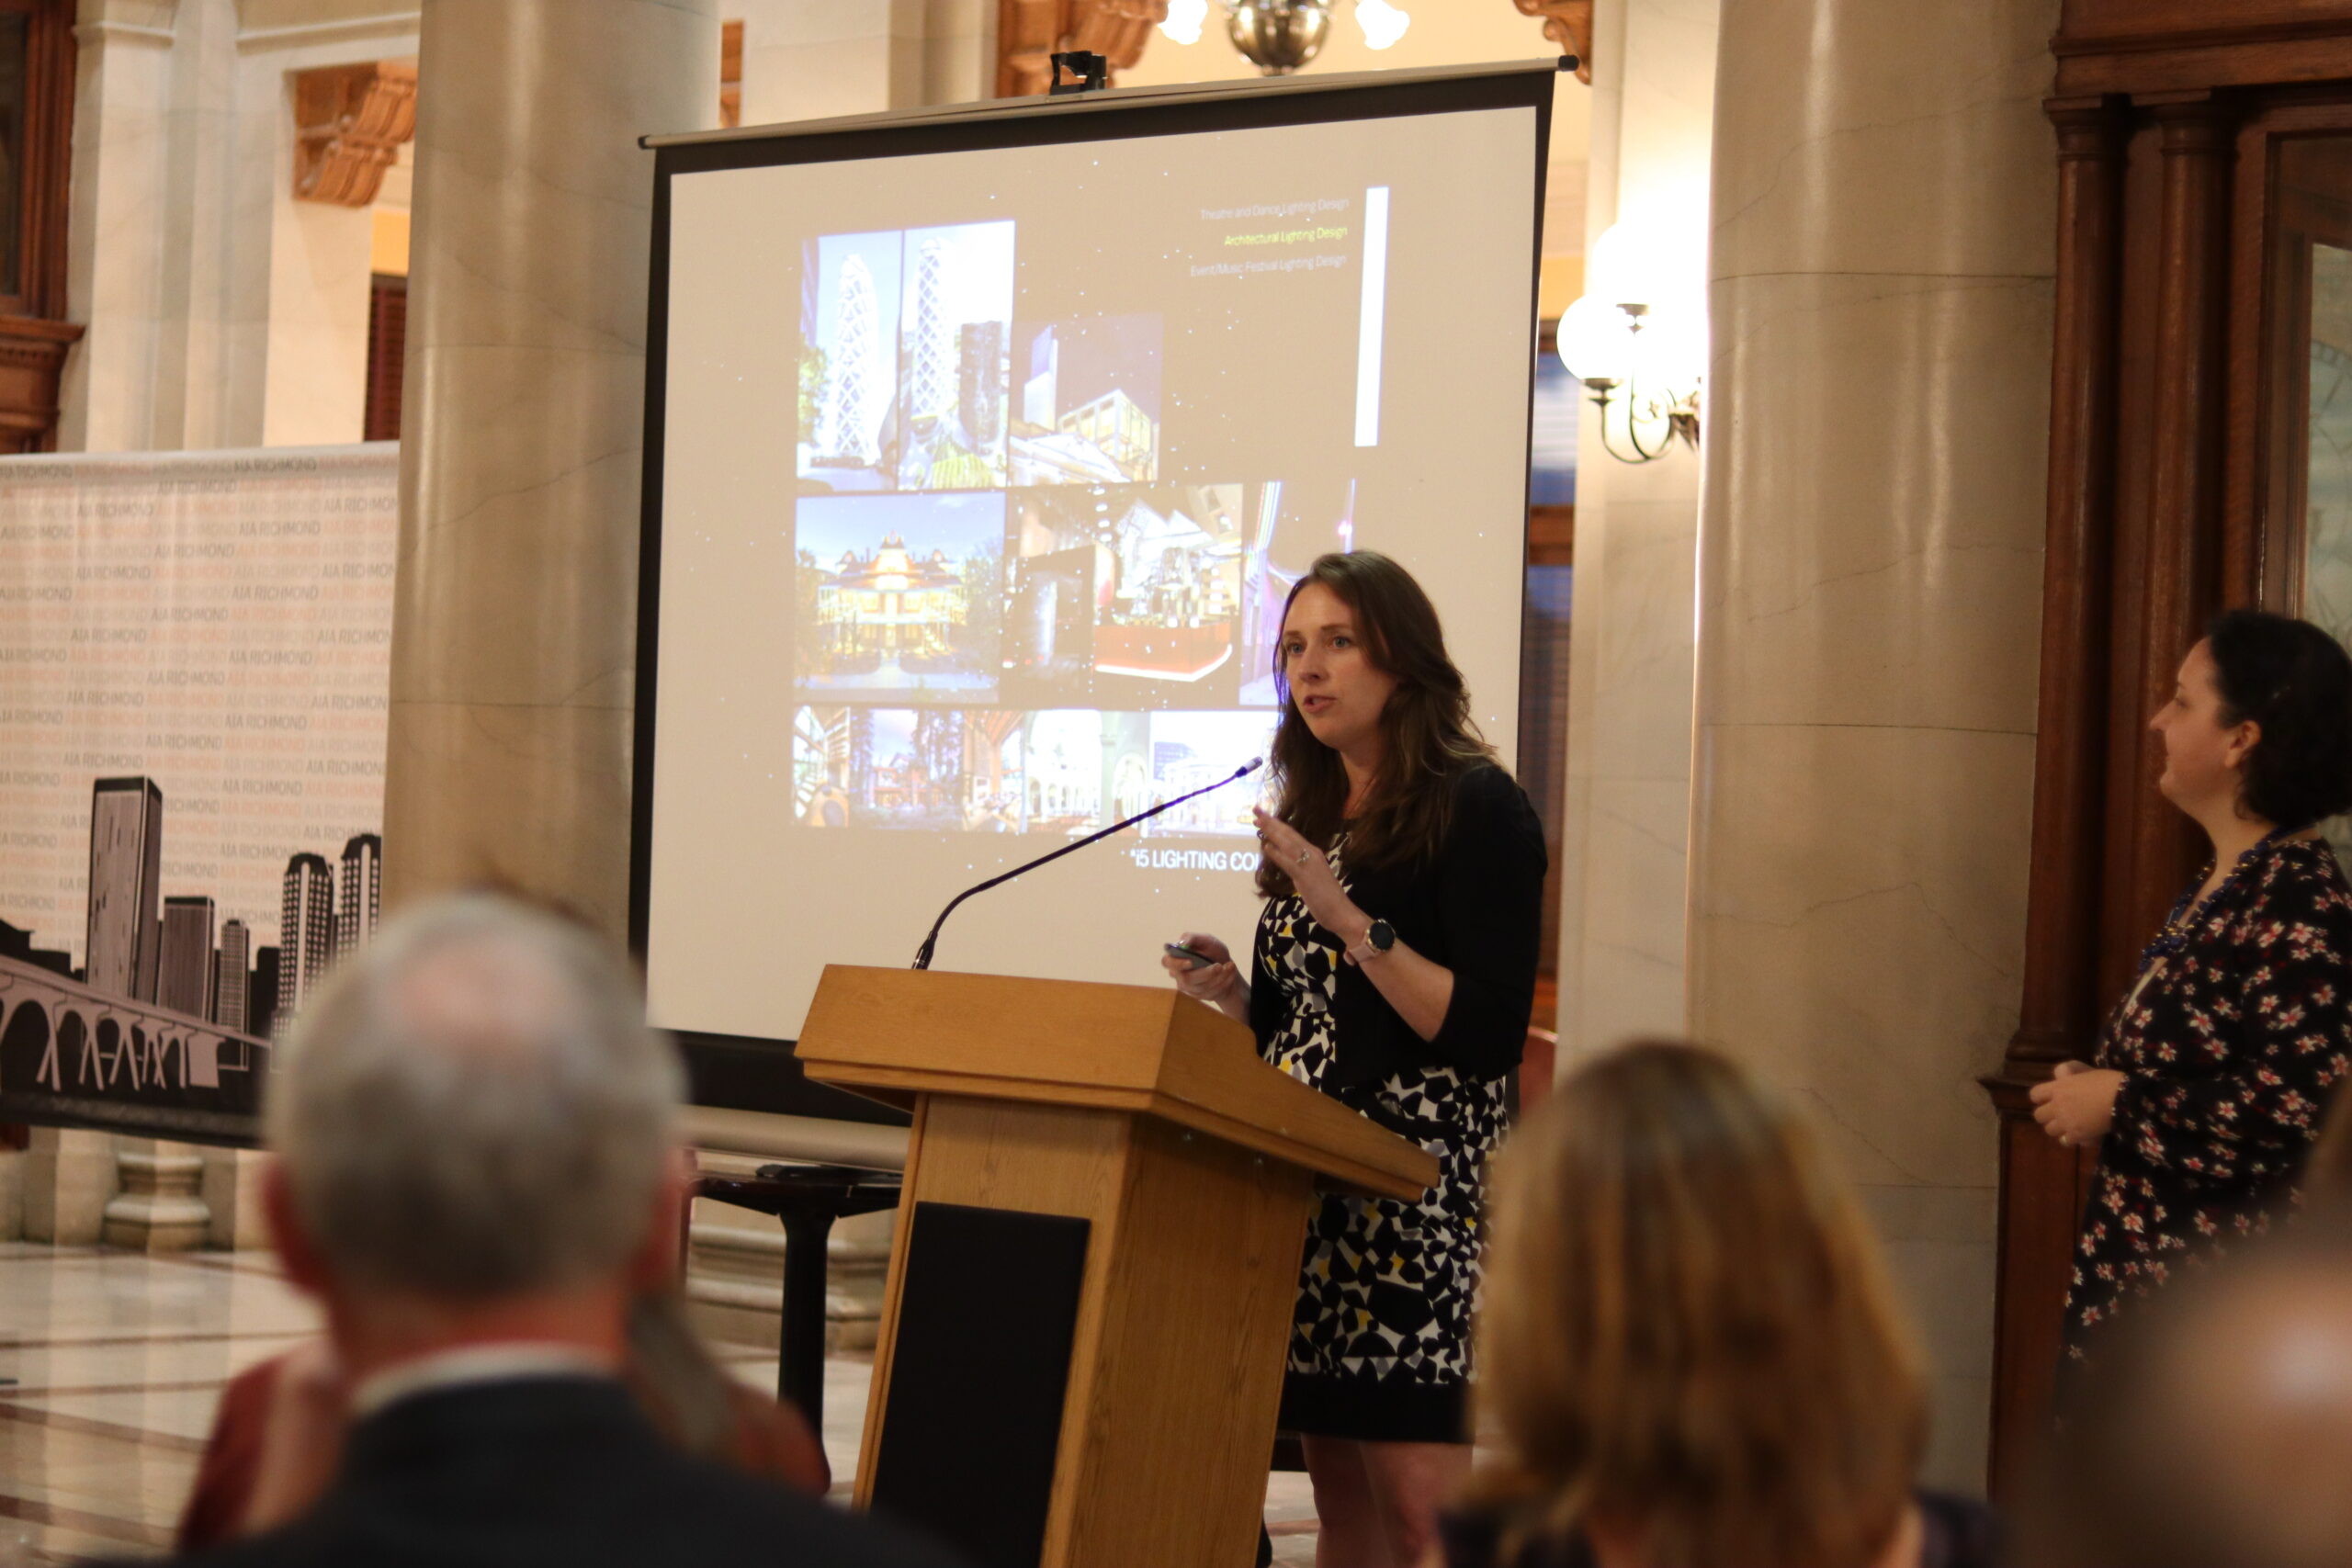 Rachel Shelton making opening remarks at 2021 honors ceremony in the foreground. A screen in the background.